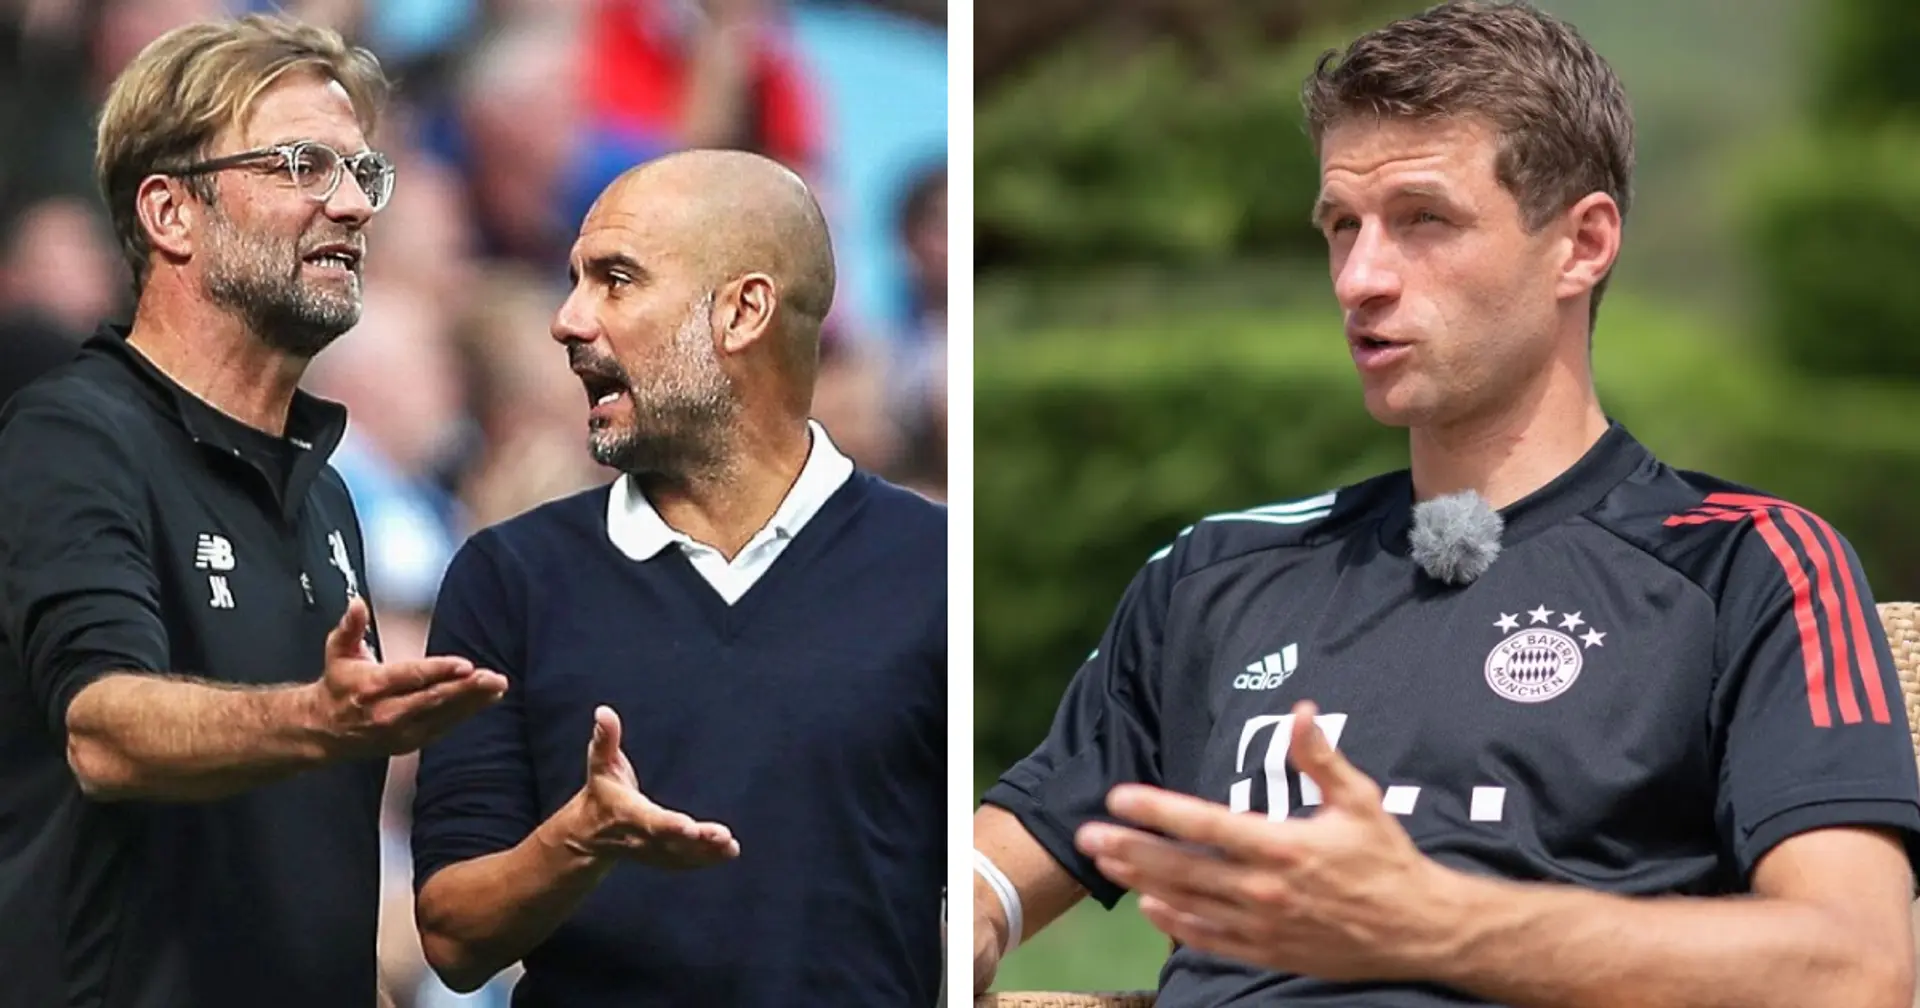 Thomas Muller asked to pick between Liverpool and Man City, delivers top response